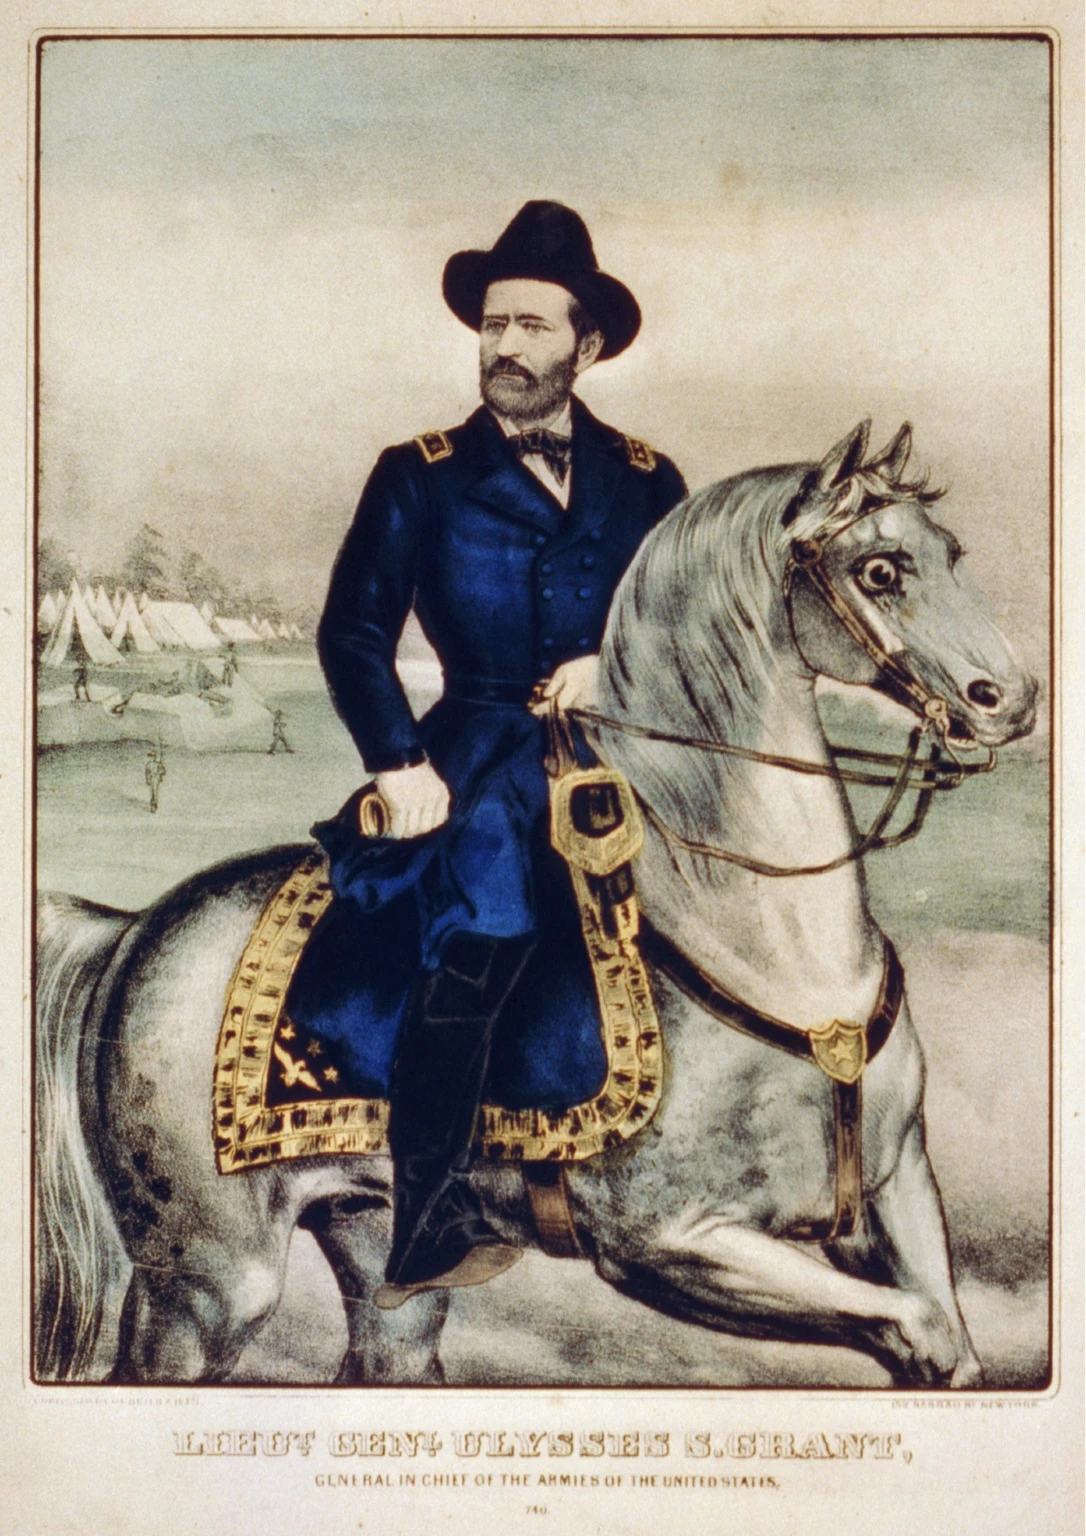 Currier & Ives Painting of U.S. Grant 